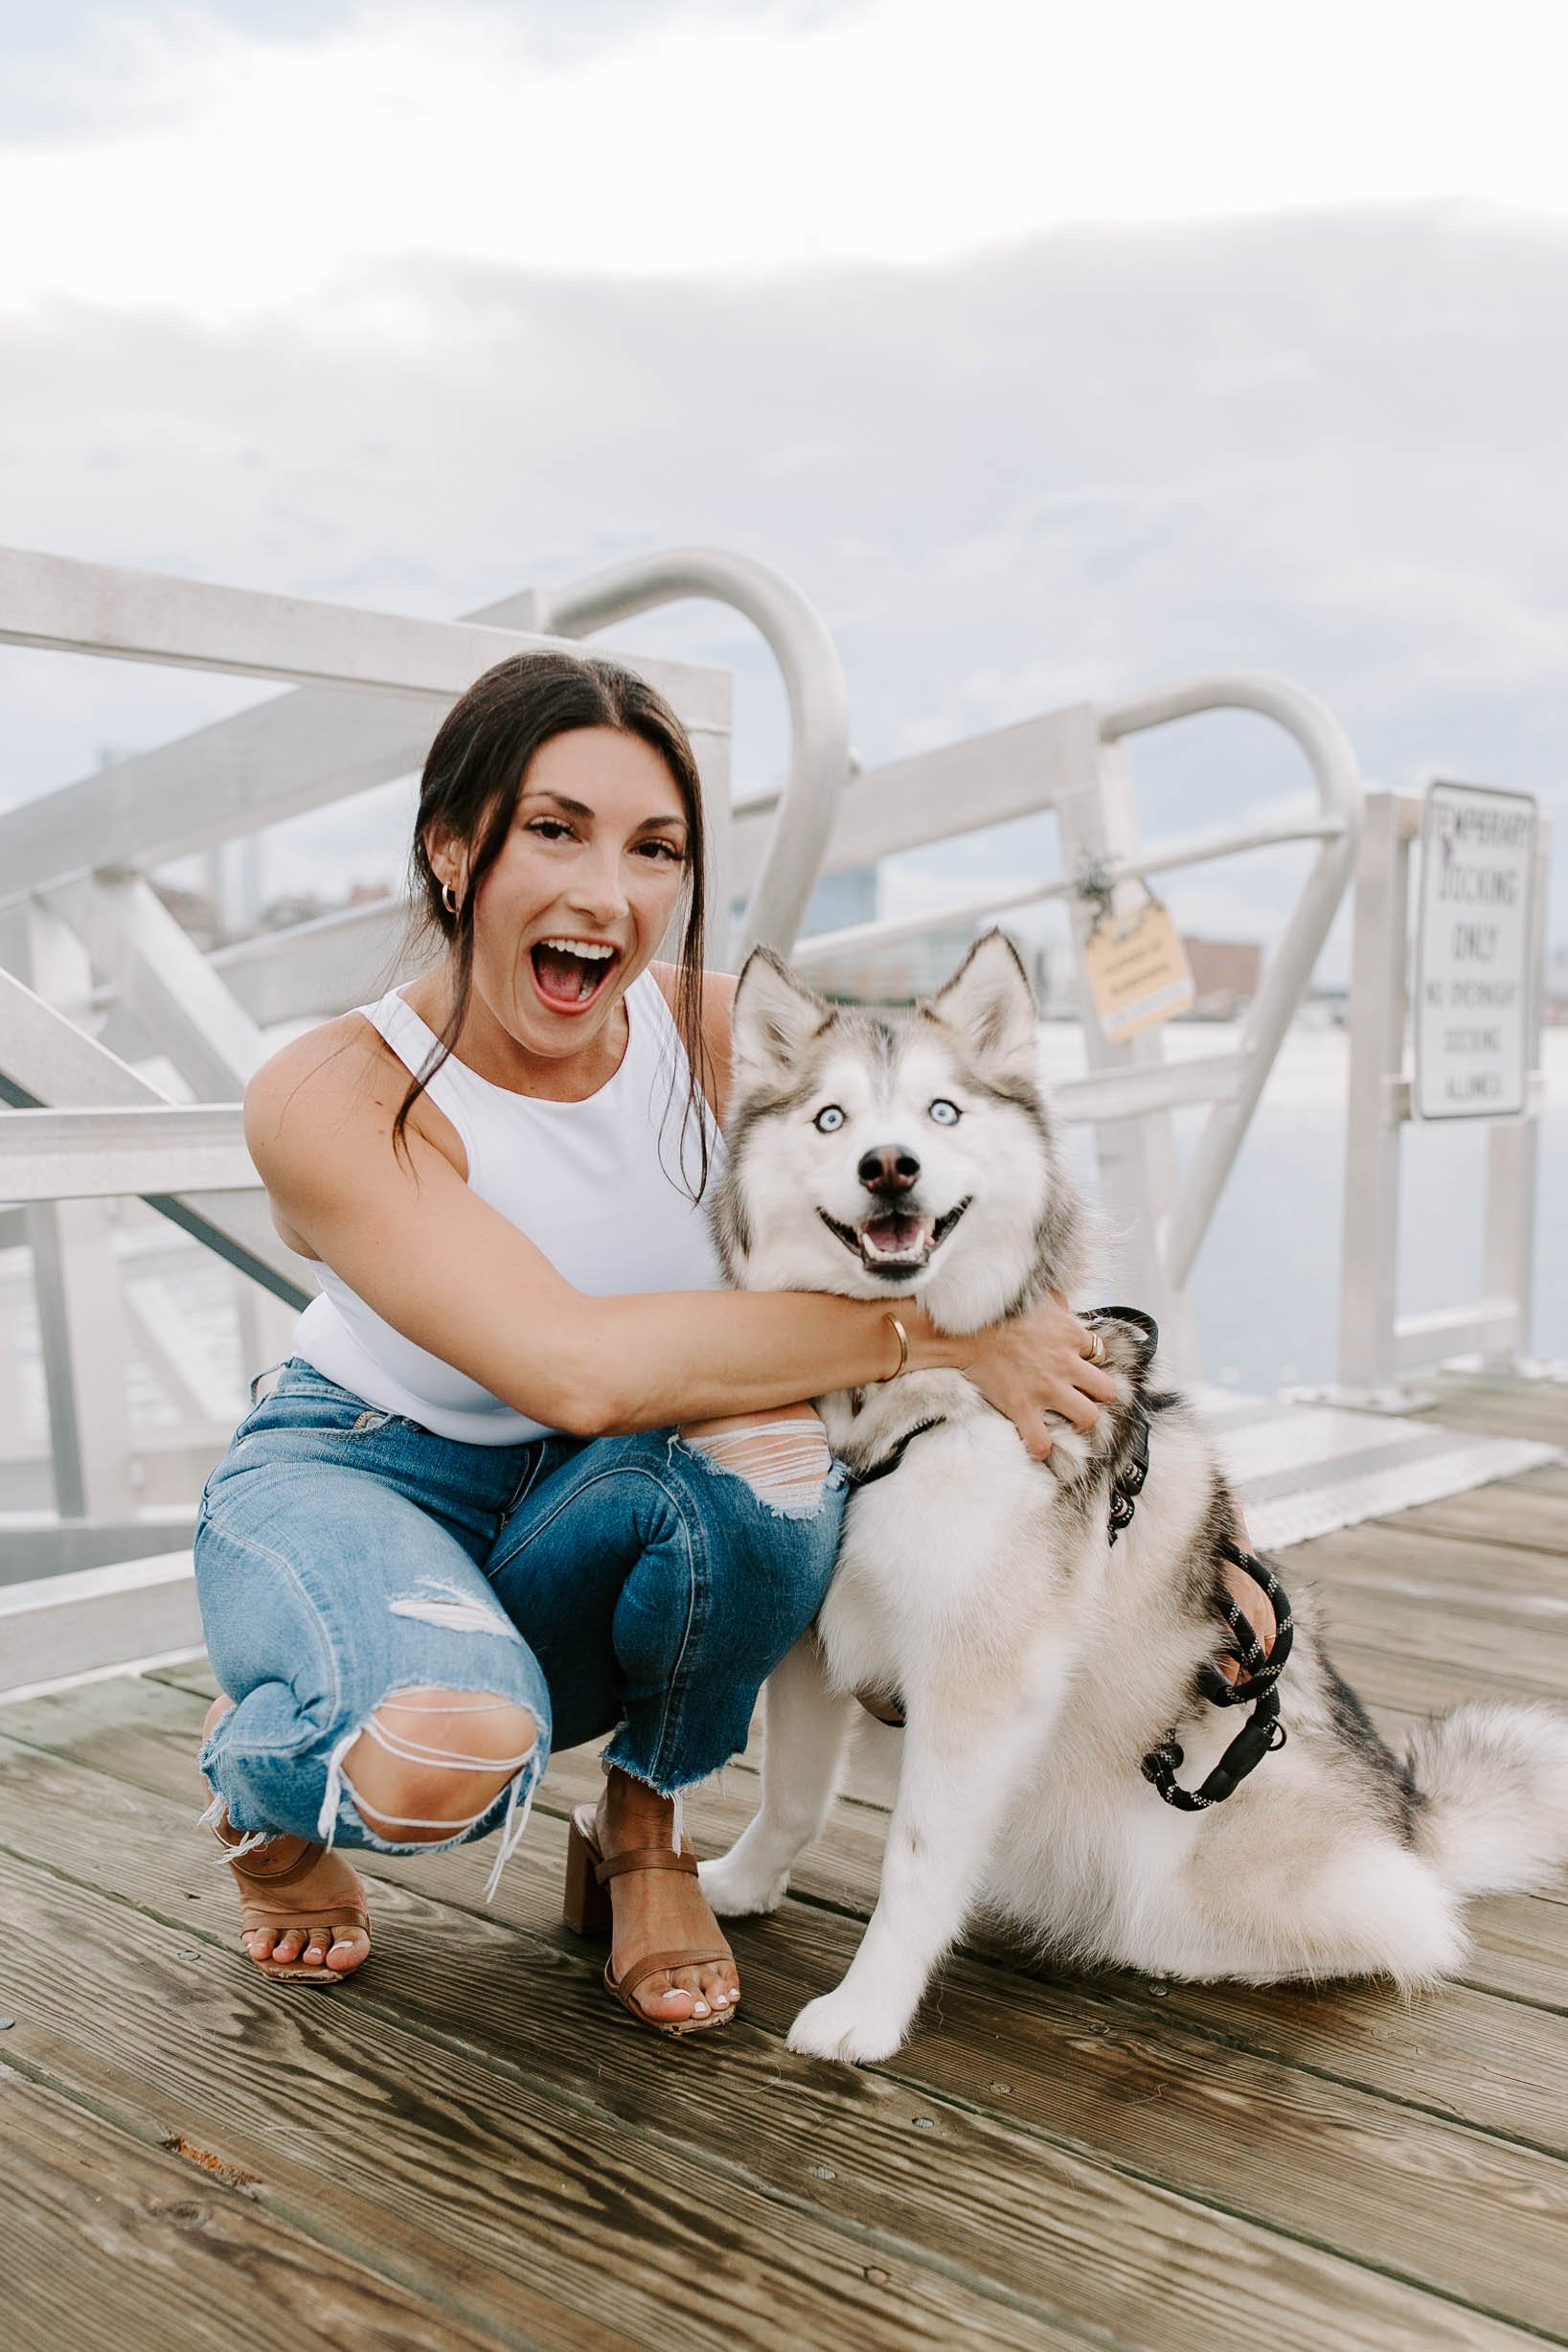  Woman smiling holding husky at Seaport in Boston 